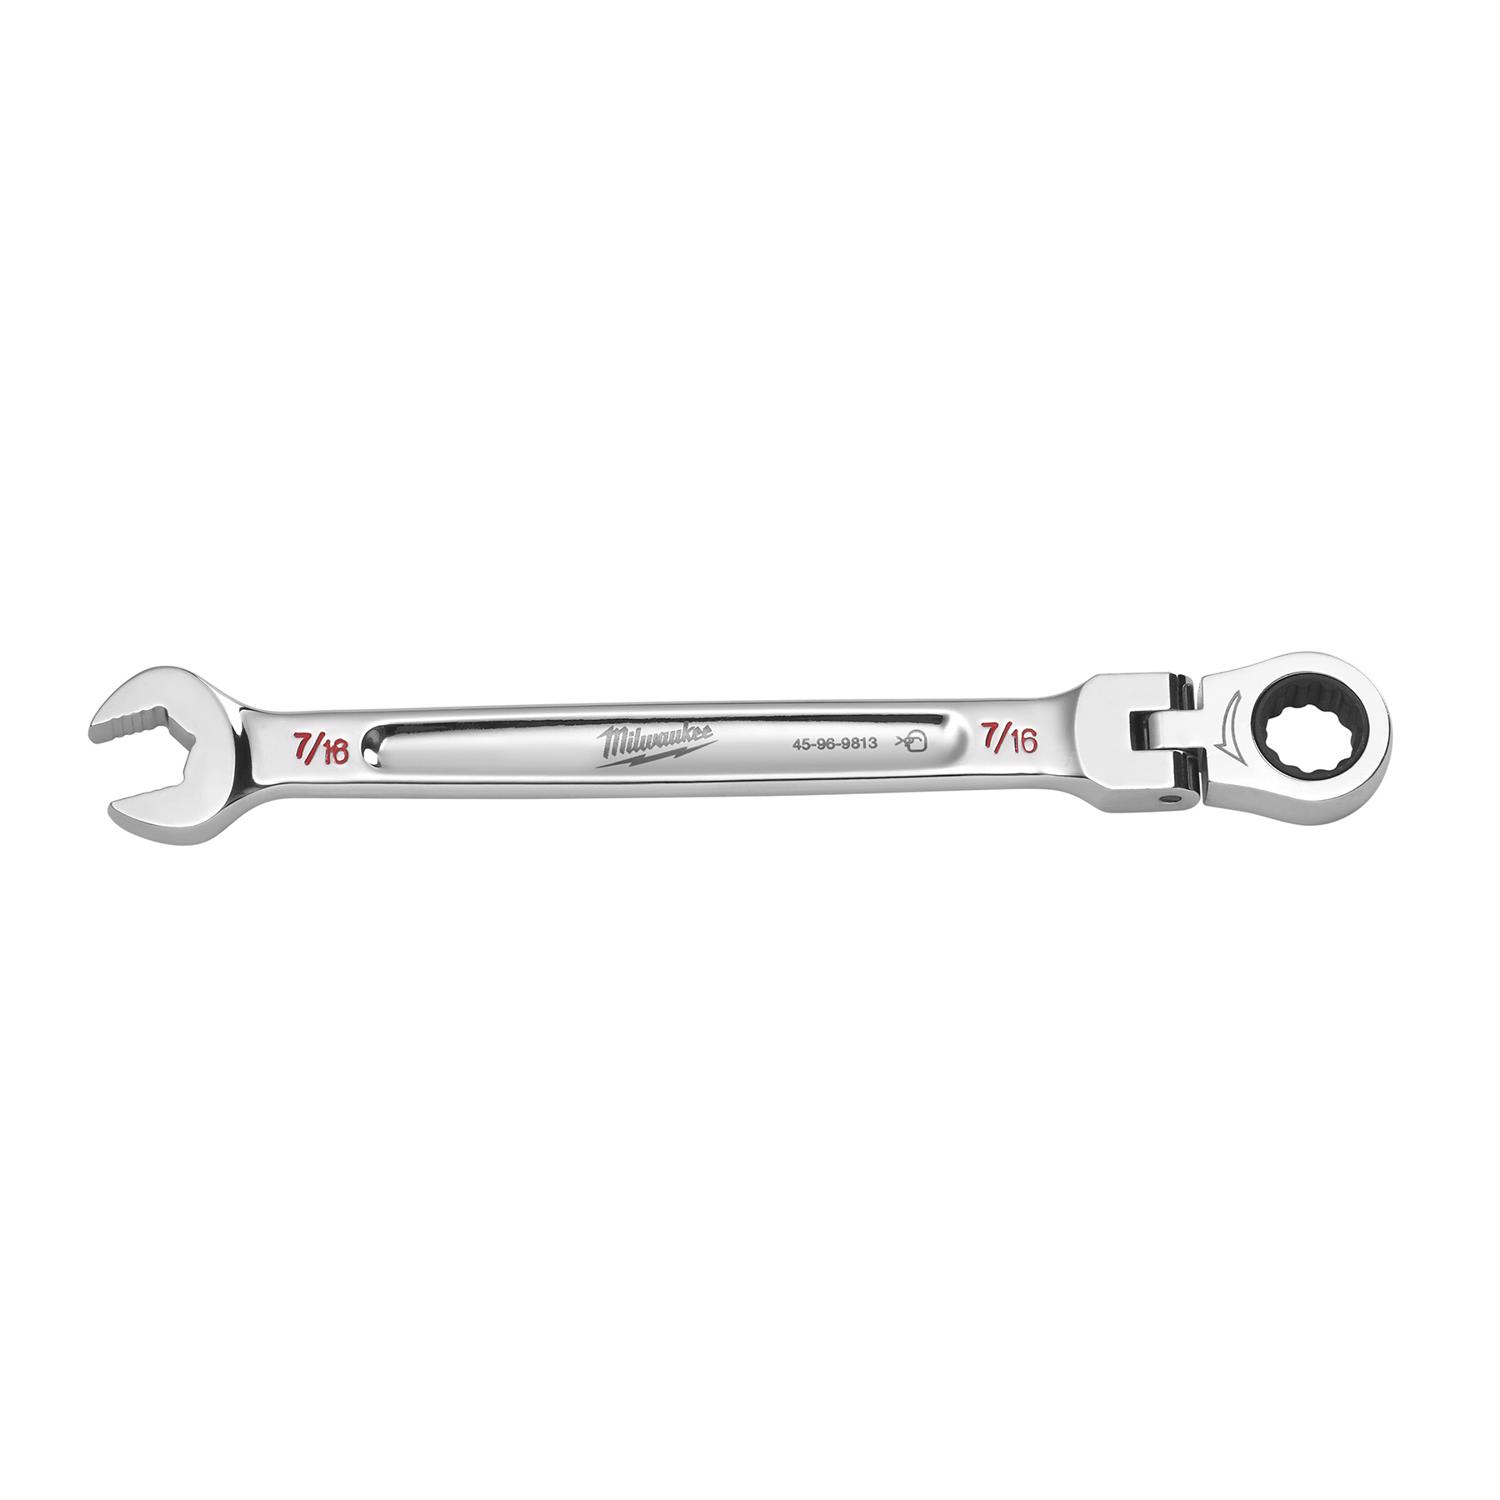 Milwaukee 7/16 in. X 7/16 in. 12 Point SAE Flex Head Combination Wrench 6.75 in. L 1 pc -  45-96-9813